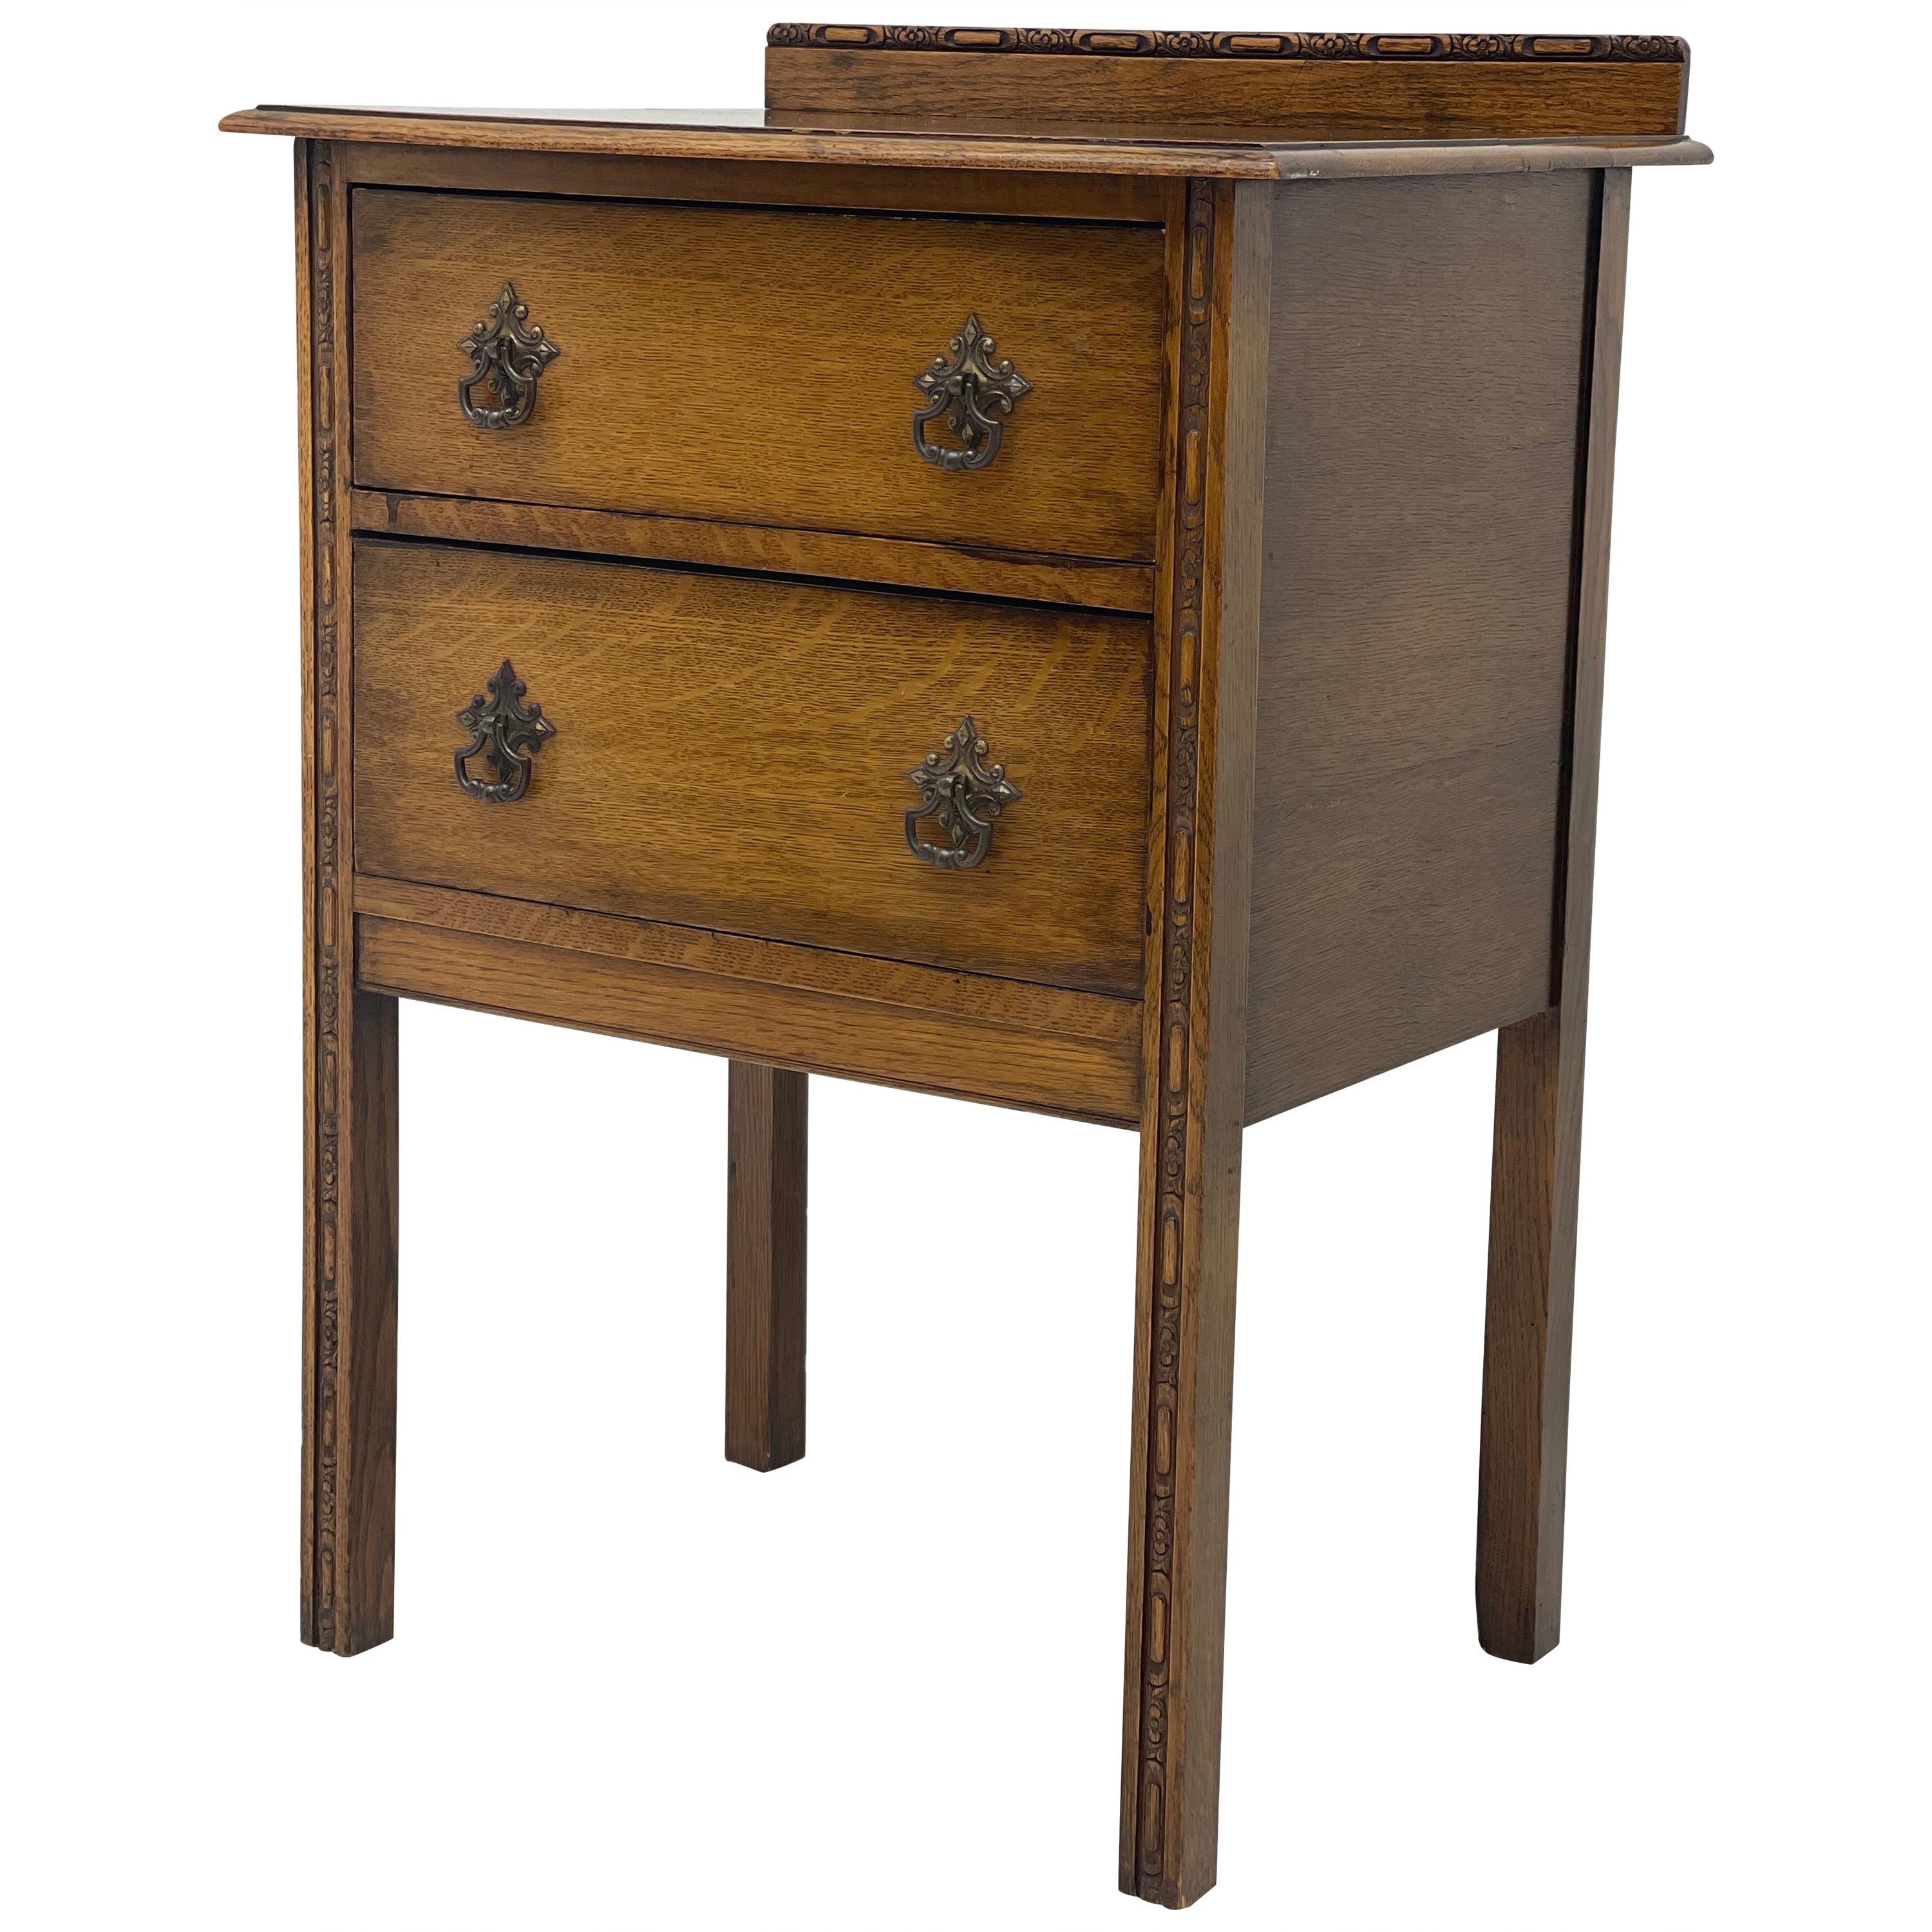 Vintage Early American Oak Accent Table or Endtable with Drawers For Sale